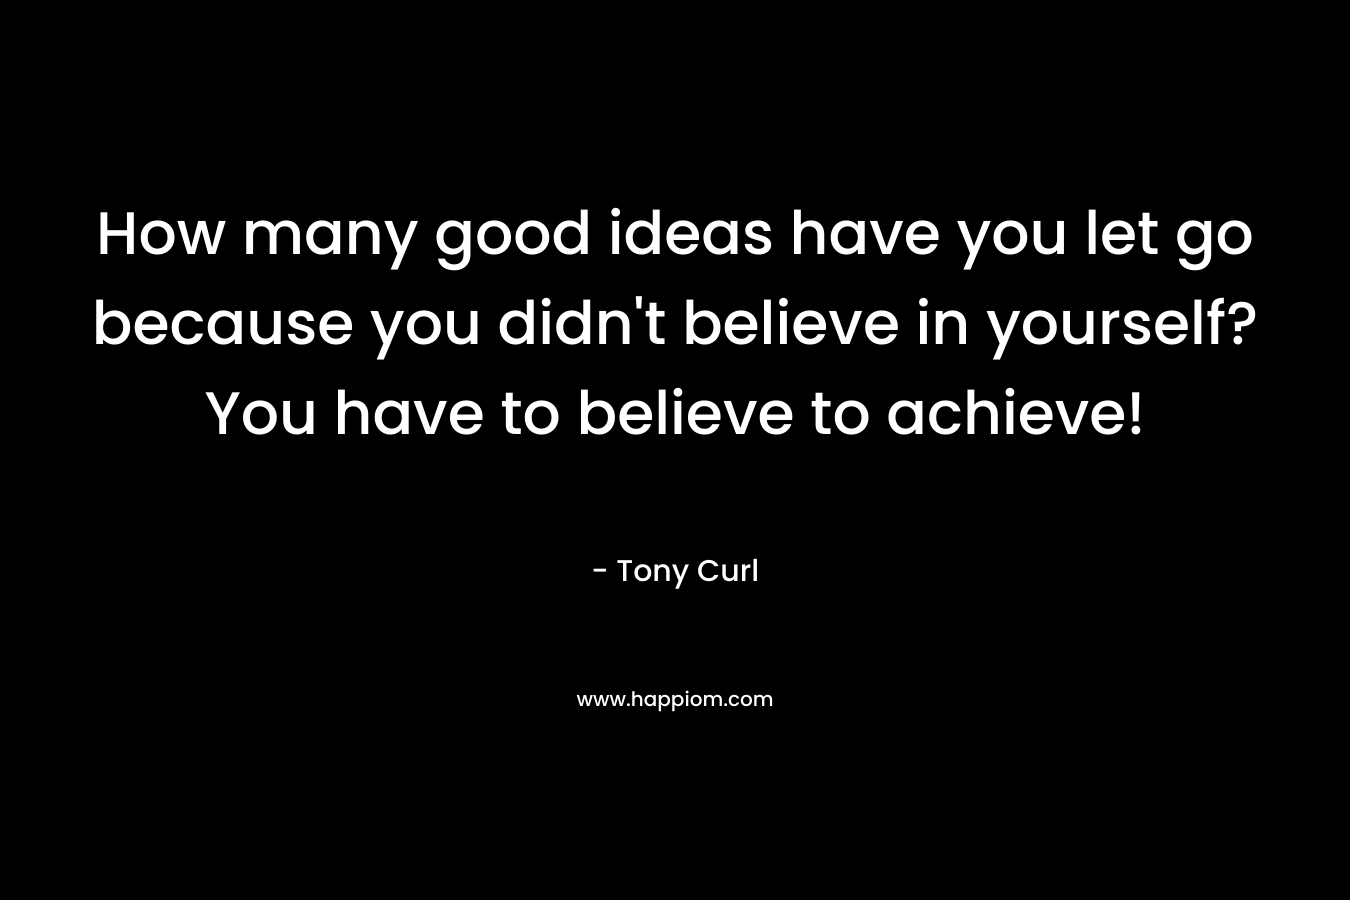 How many good ideas have you let go because you didn't believe in yourself? You have to believe to achieve!